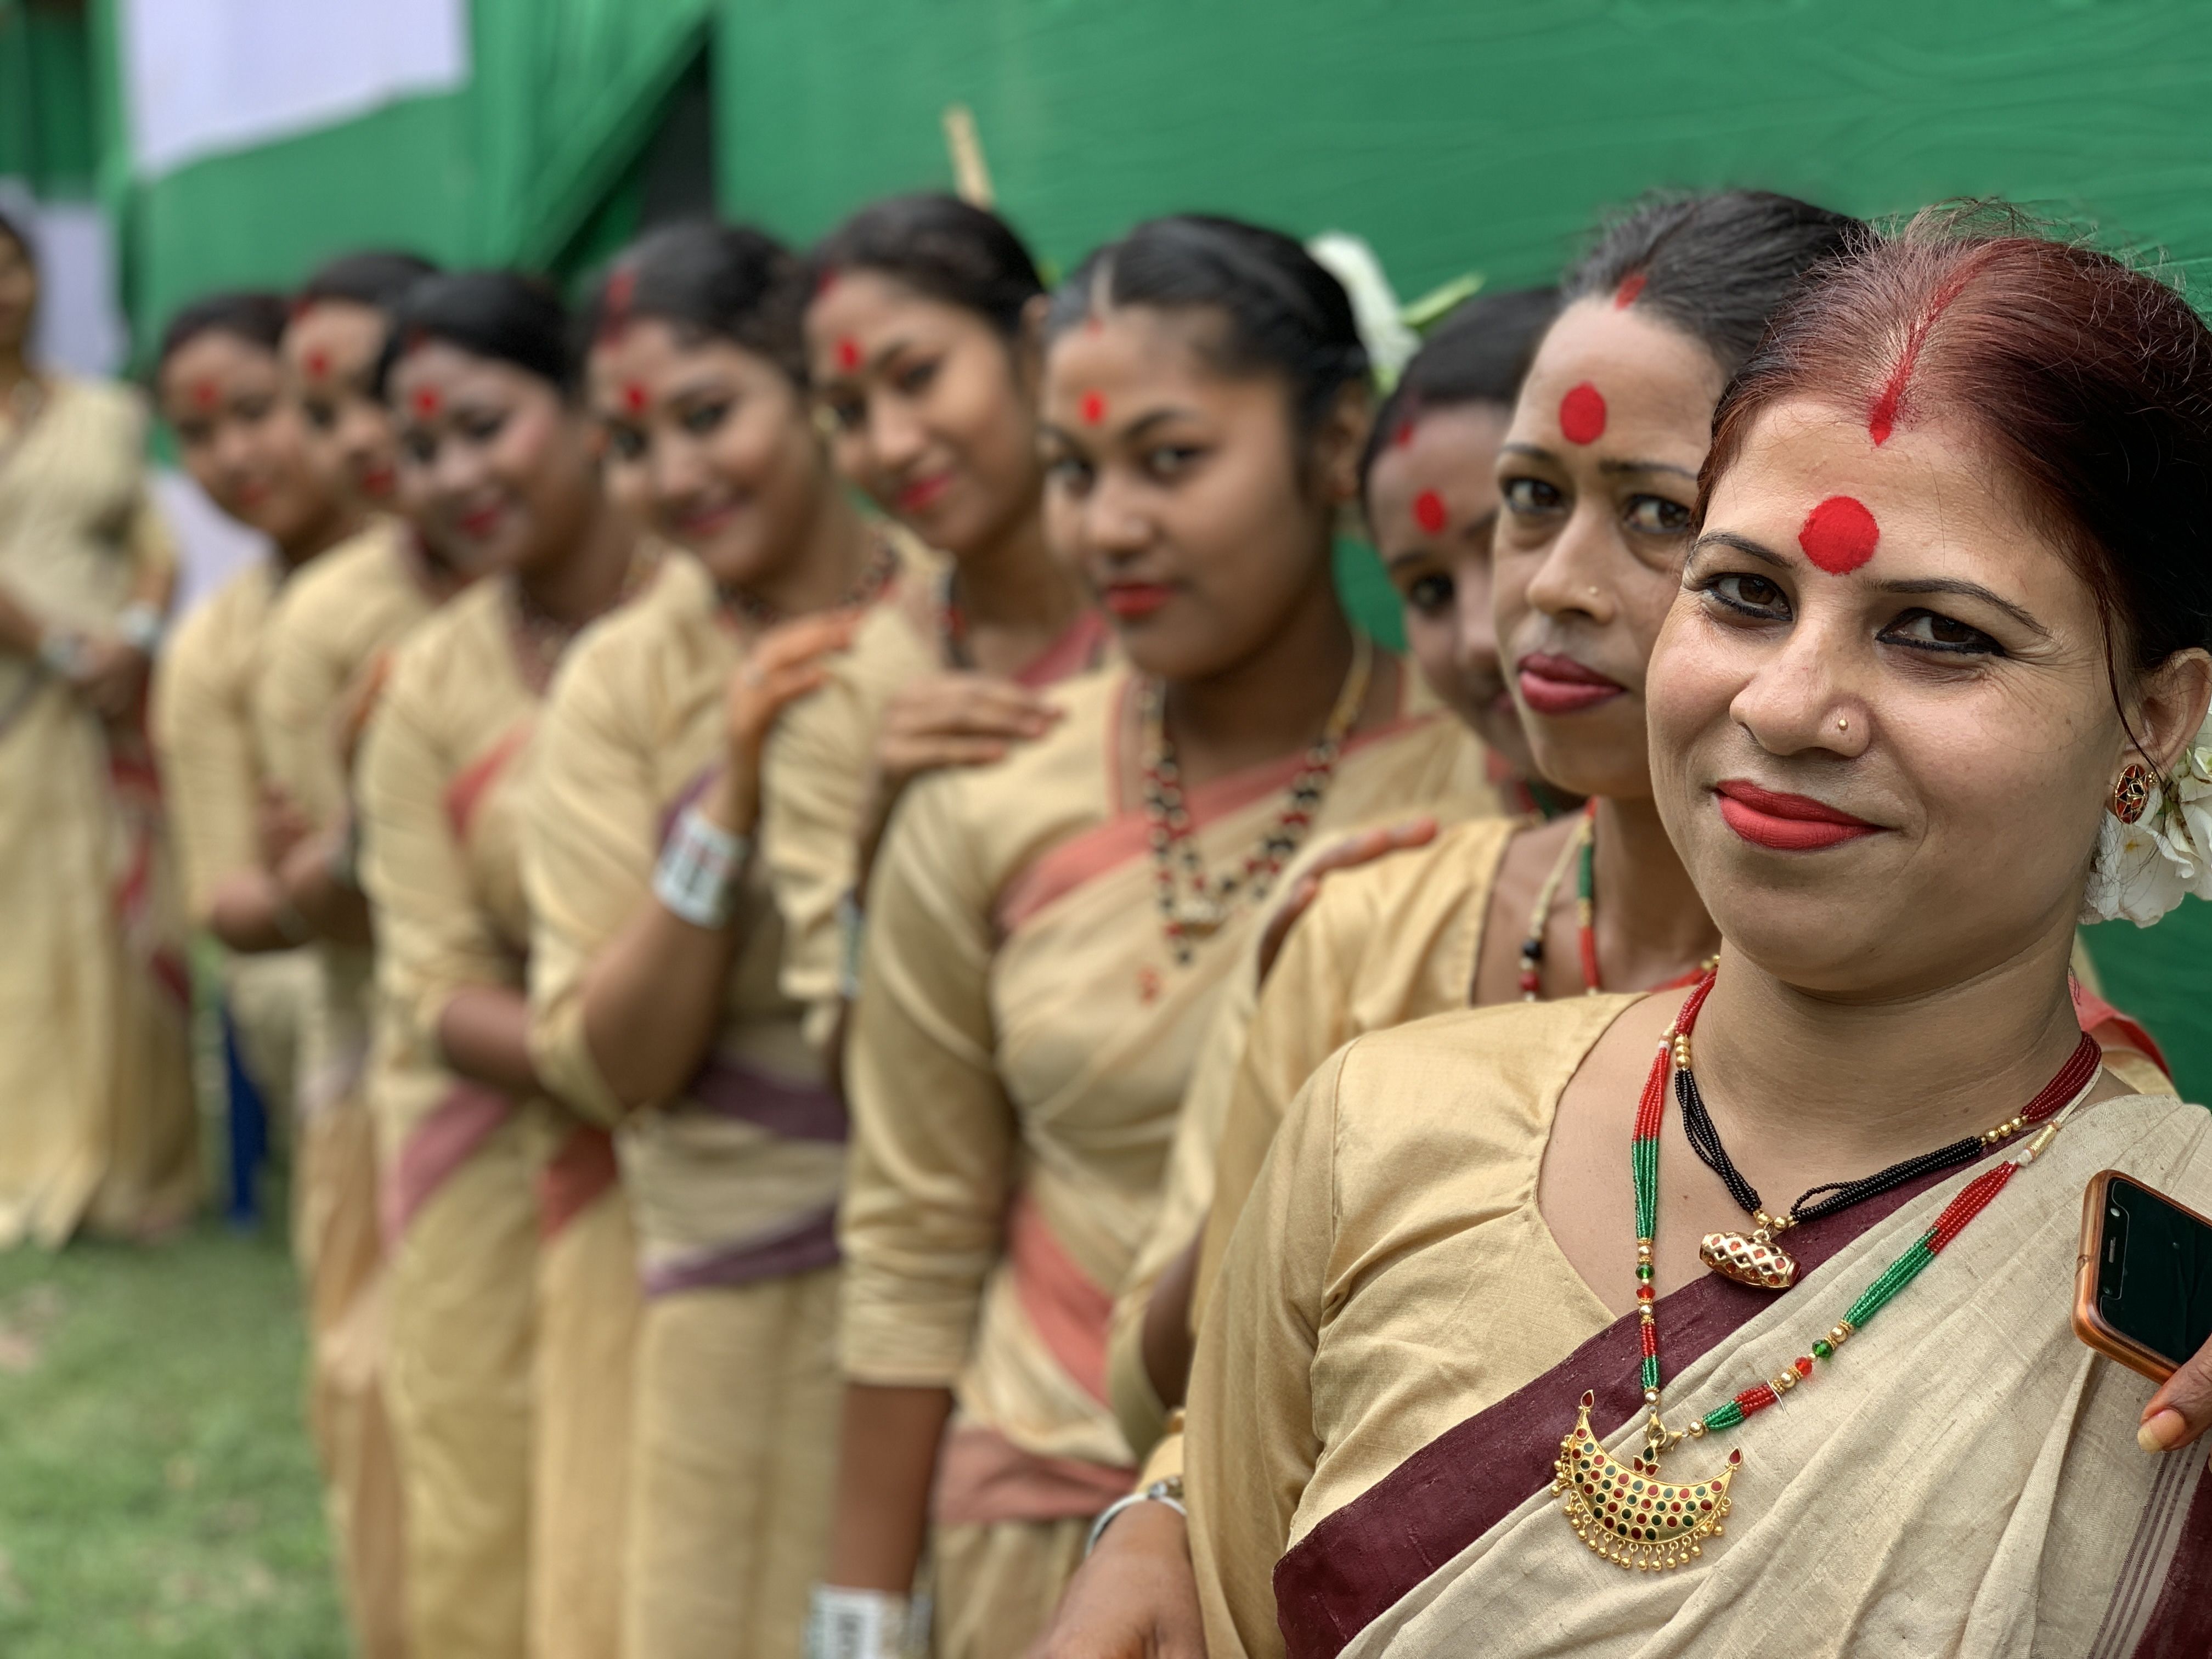 Last year Salopek met these dancers in Guwahati, a city in the eastern part of India, during his walk. He regularly posts photos on social media and writes stories about the people he encounters. Image by Paul Salopek. India, 2019.